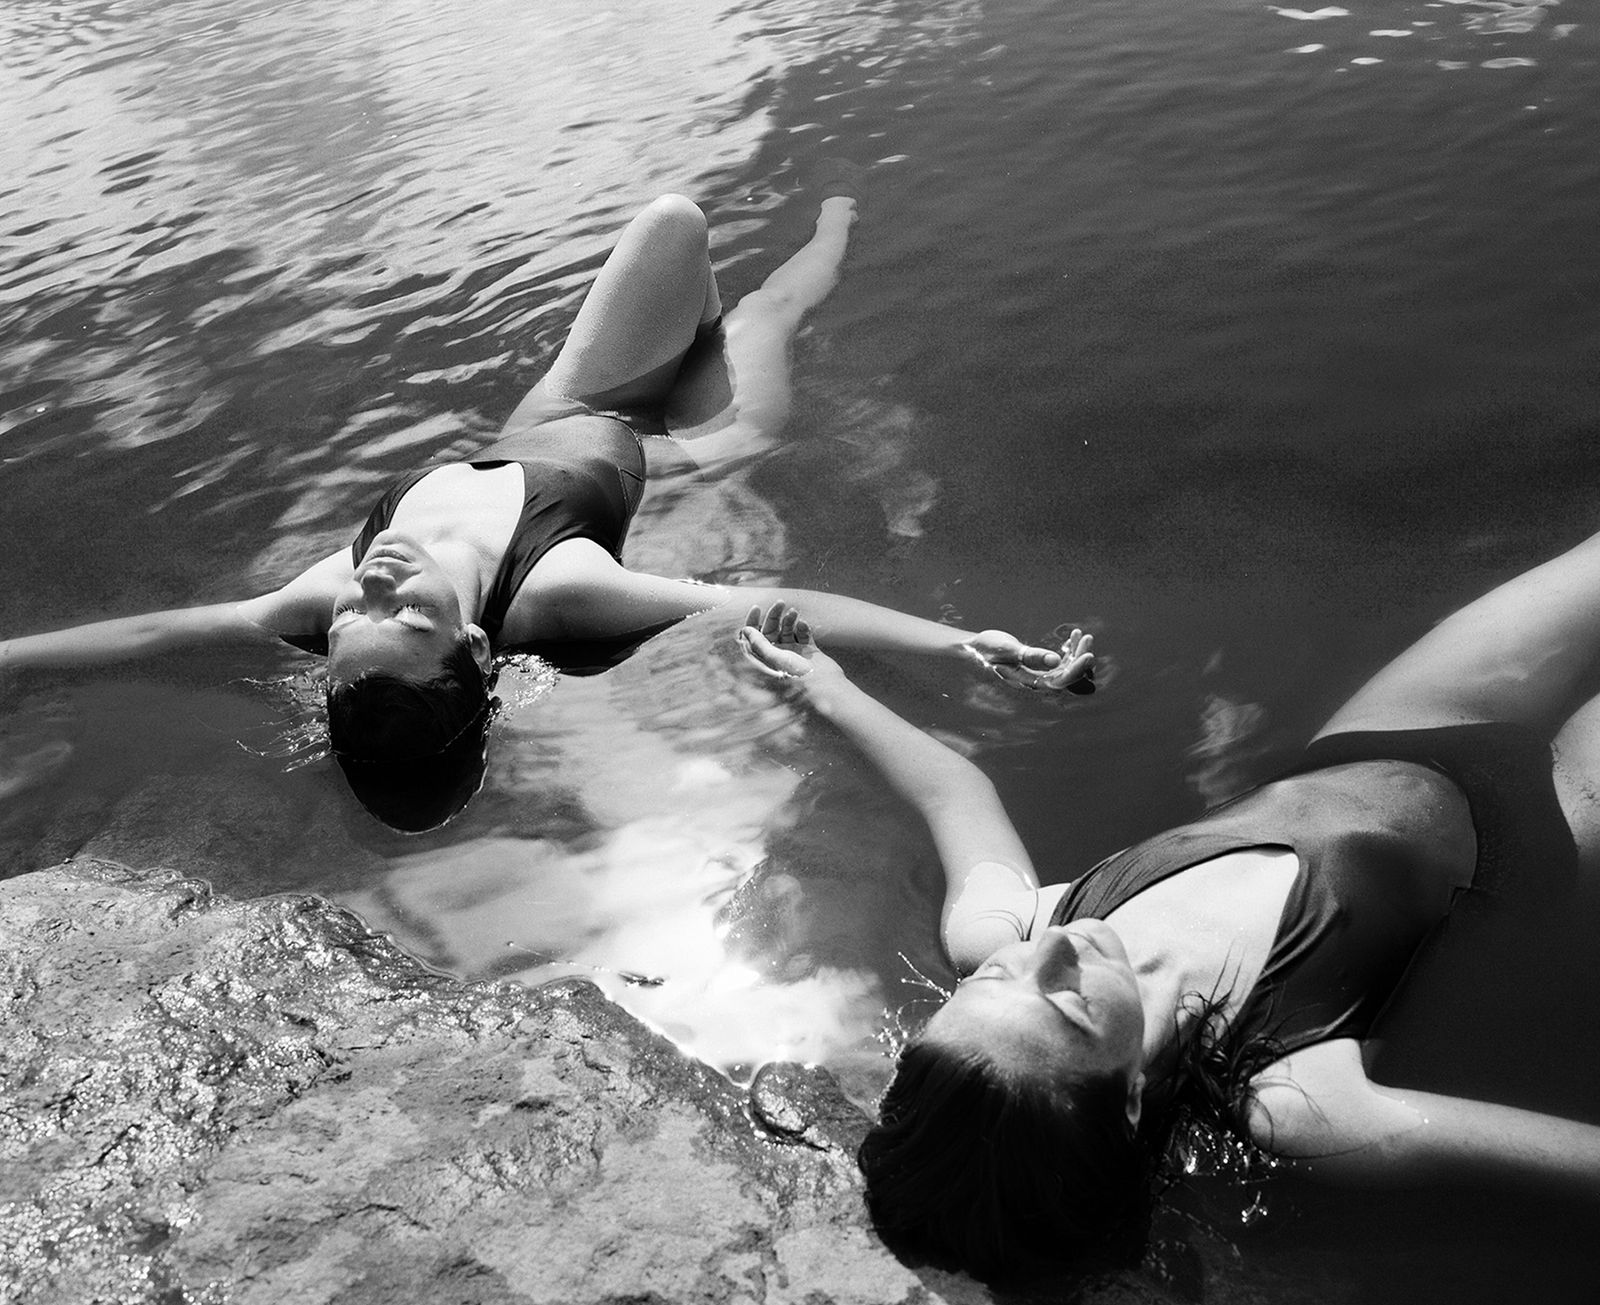 © Xanthe Hutchinson - Bodies of Water/Bodies in Water